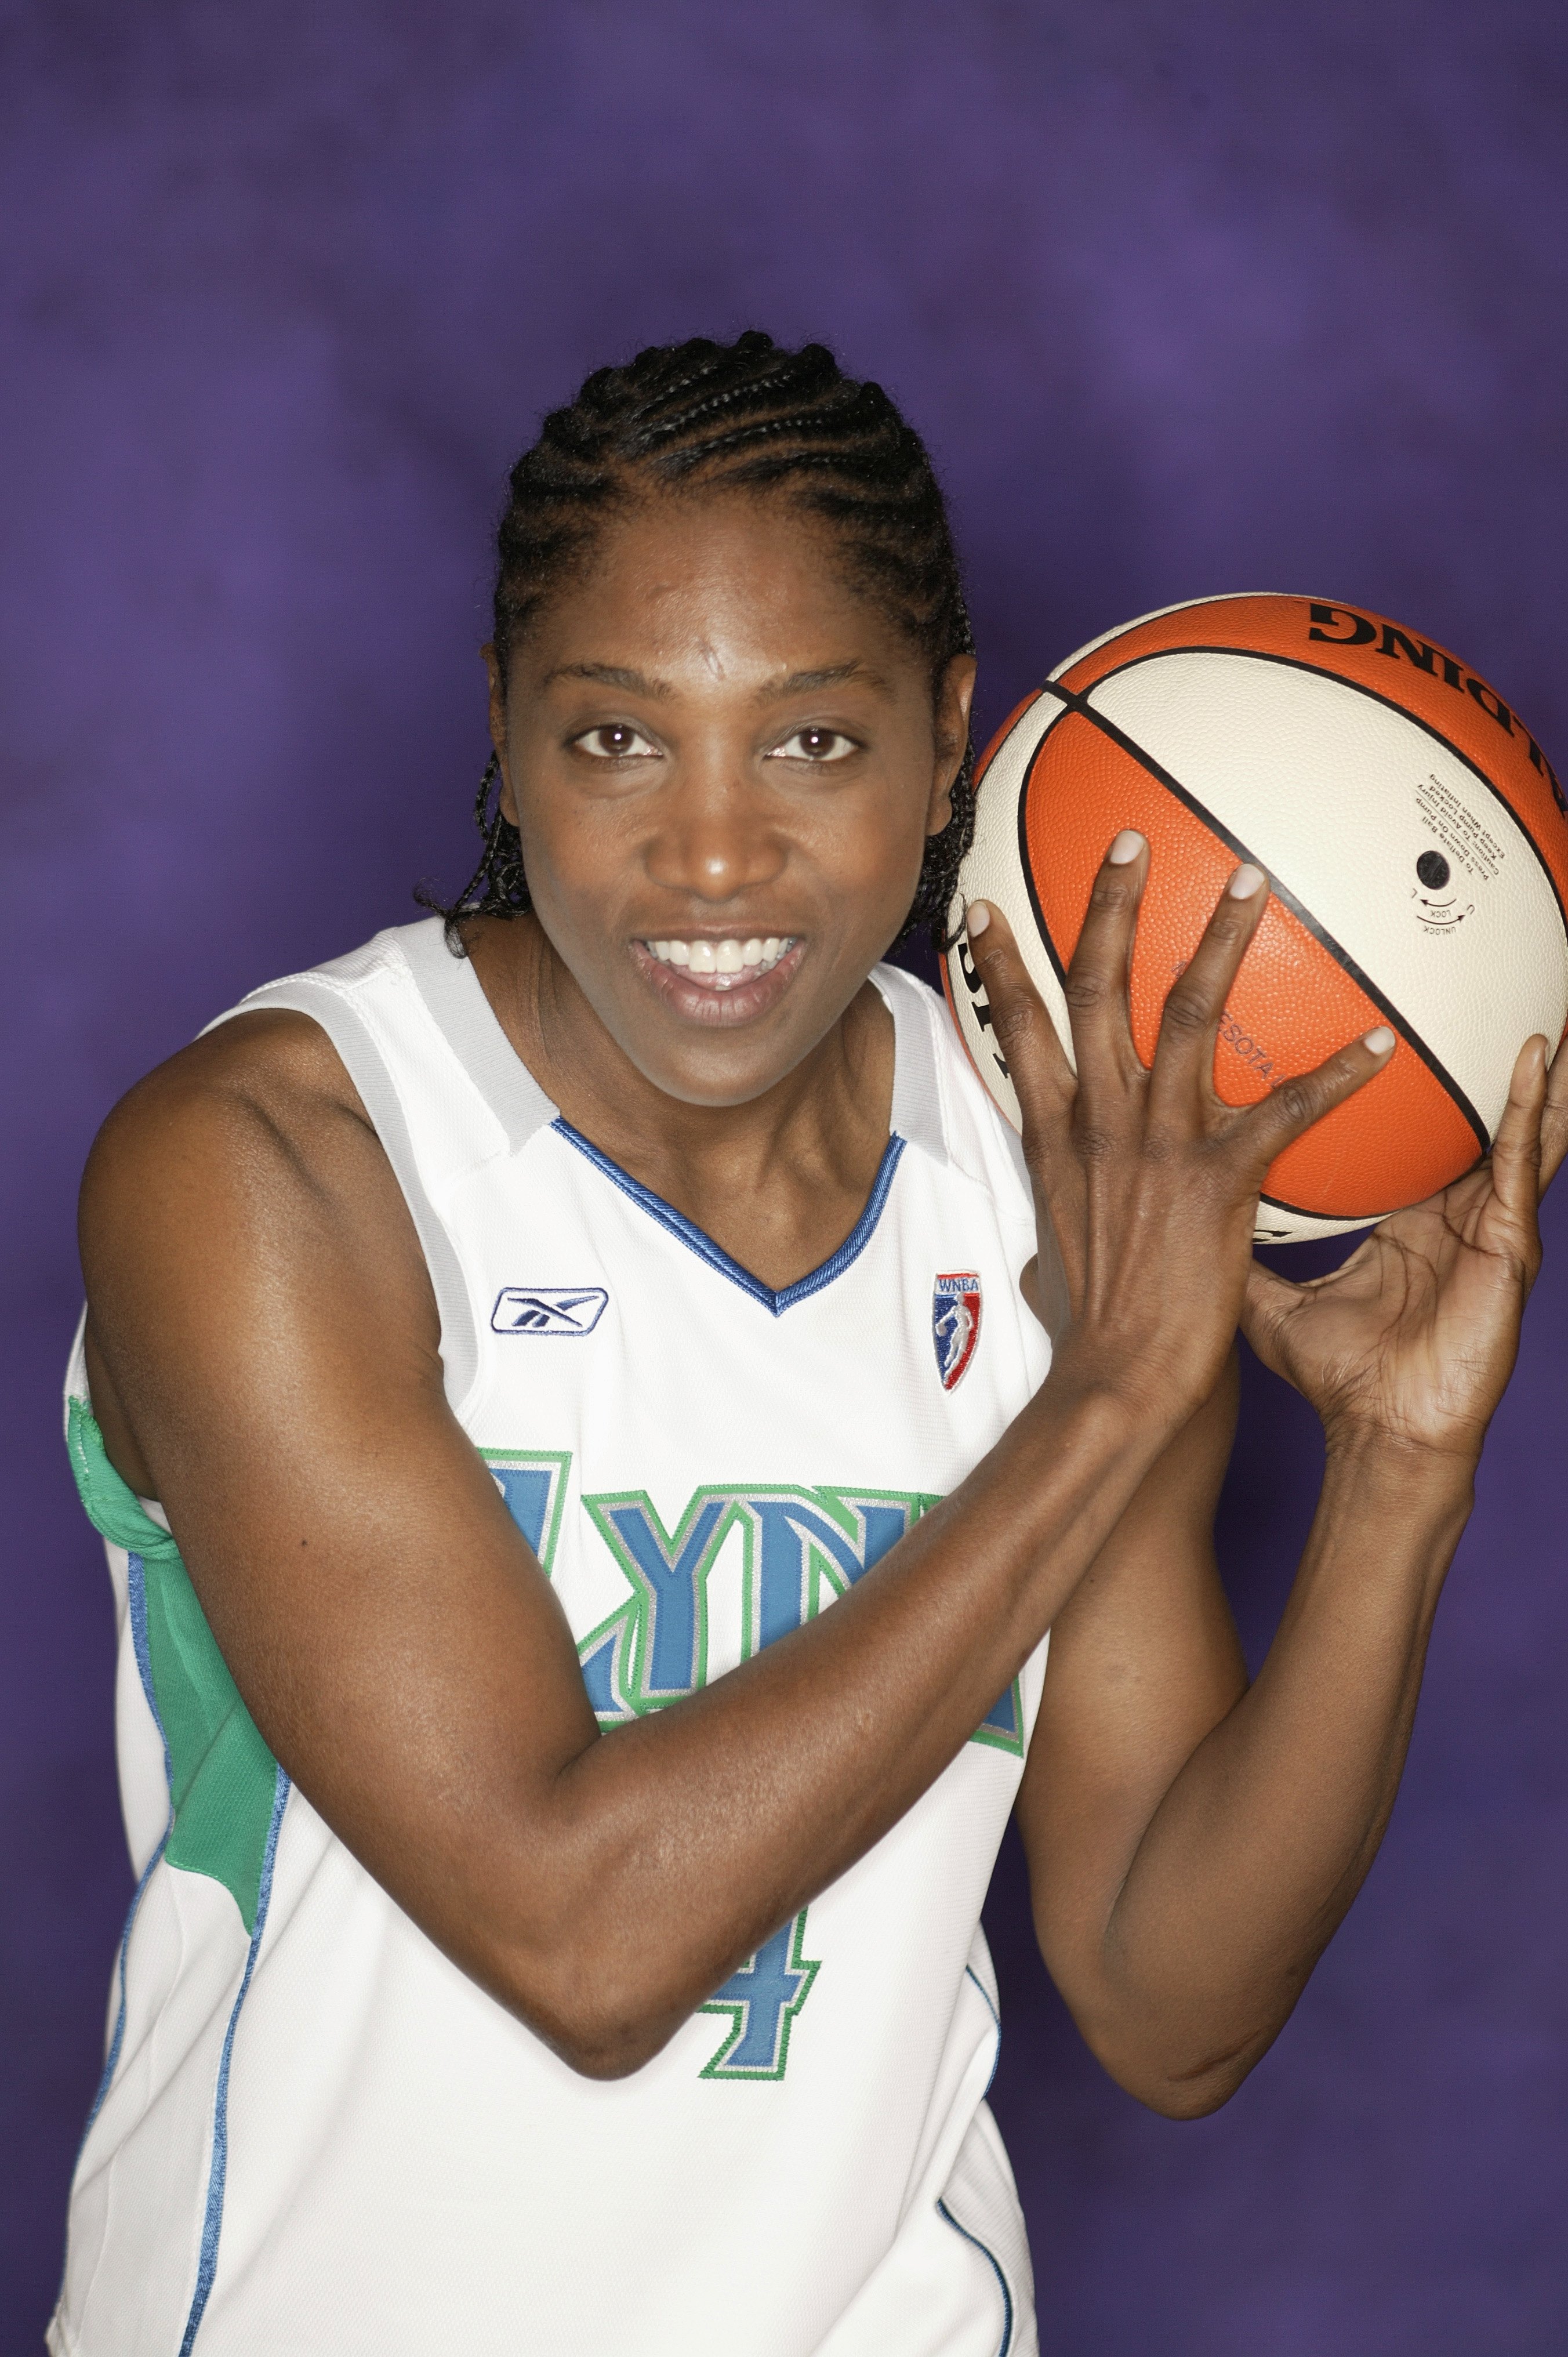 Teresa Edwards #4 of the Minnesota Lynx poses for a portrait during the 2004 WNBA Media Day at Target Center on April 27, 2004 | Photo: Getty Images